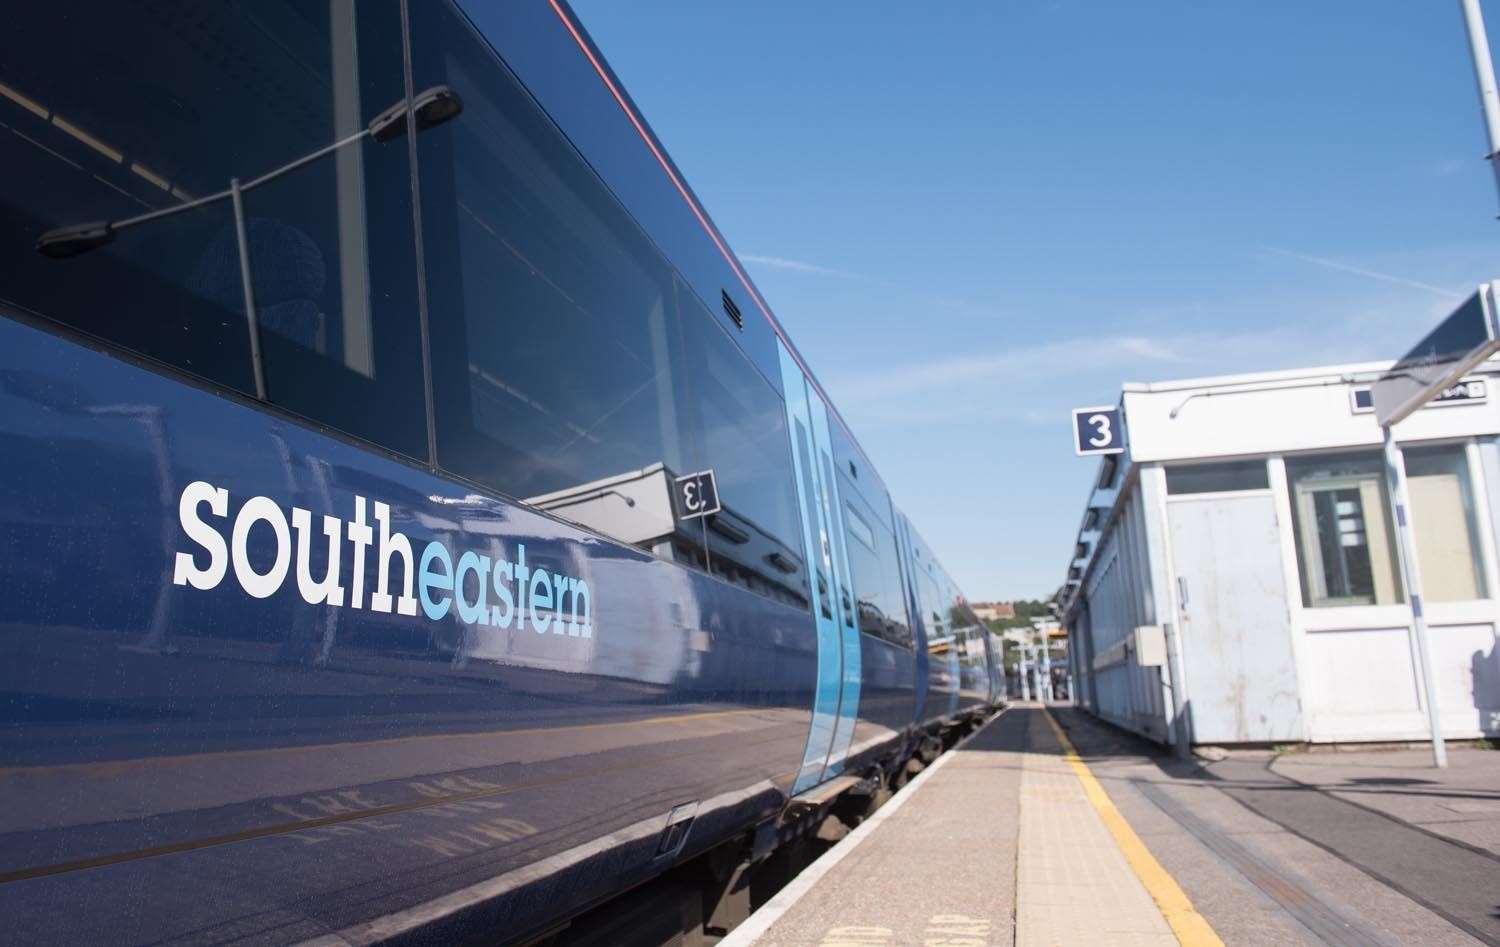 Southeastern's new service will be available from September 5. Stock image